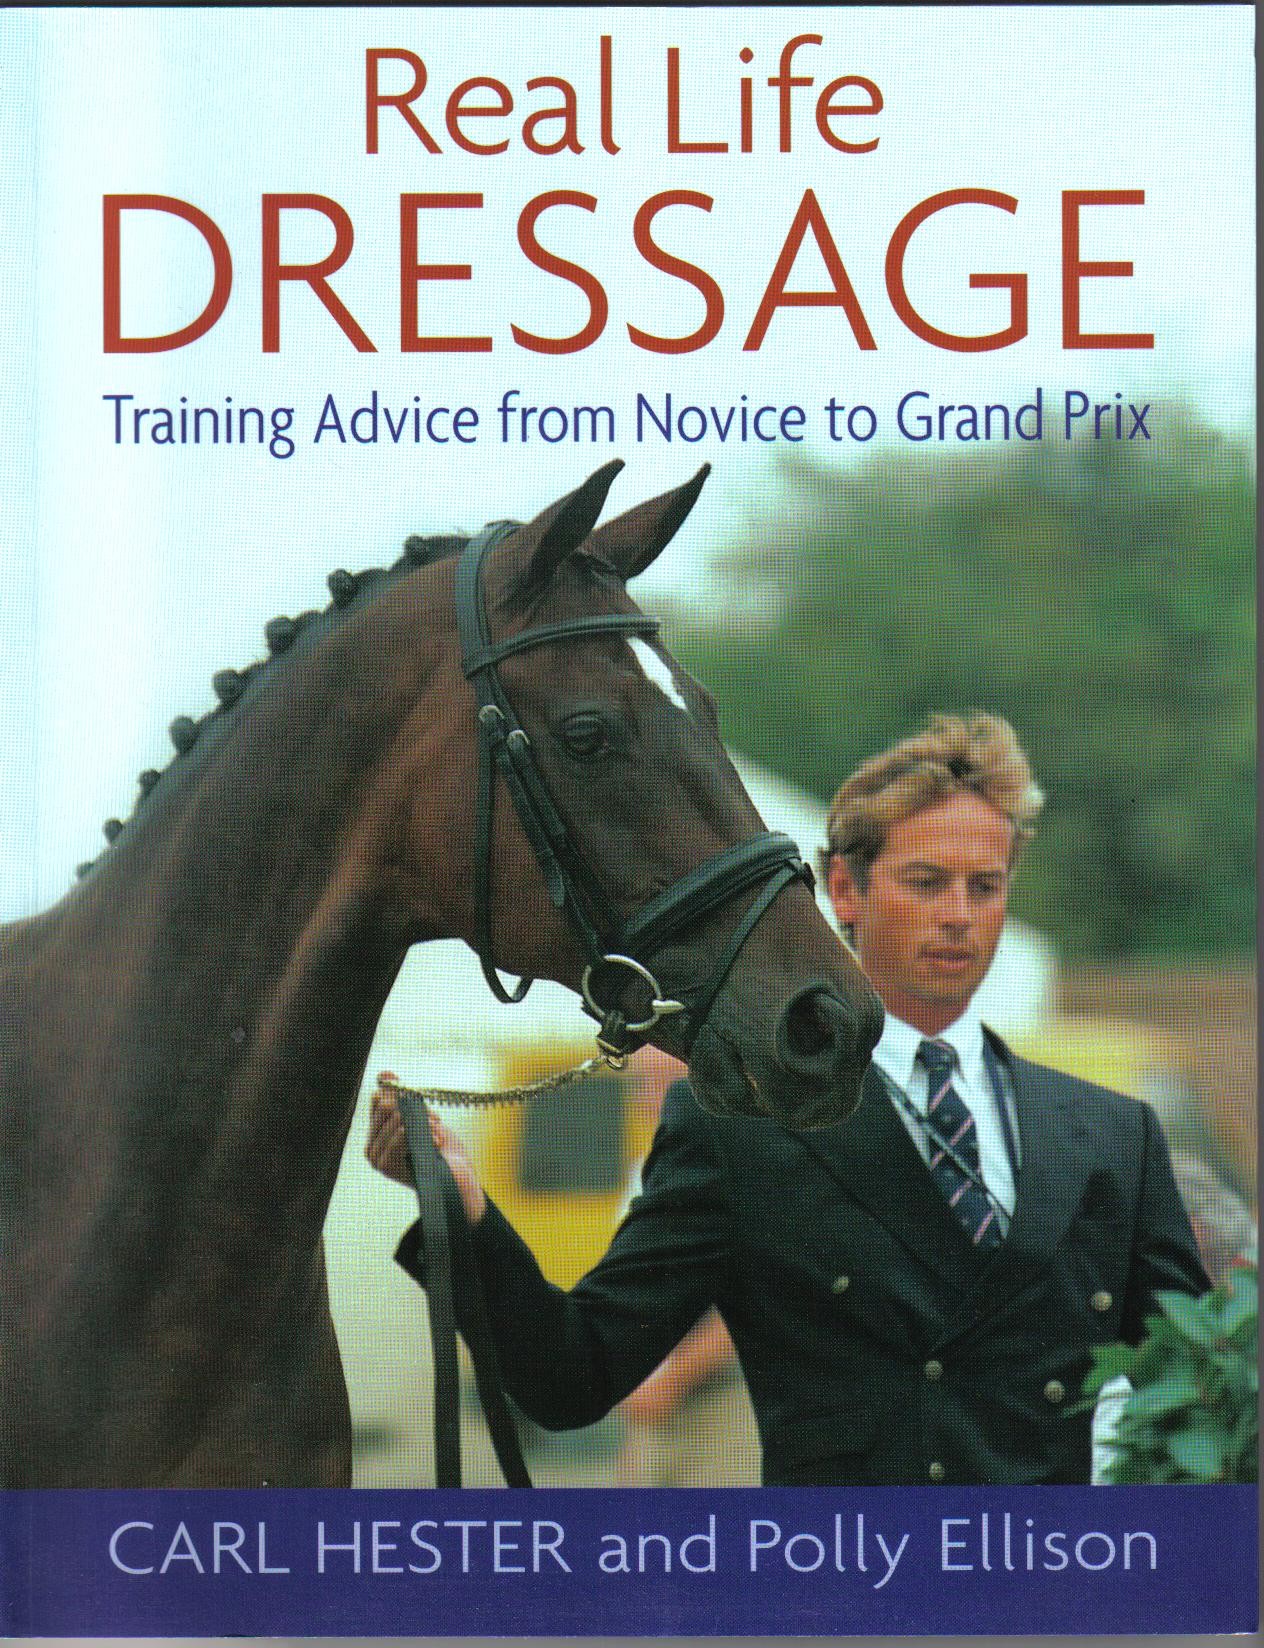 Real Life Dressage Training Advice from Novice to Grand Prix by Carl Hester and Polly Ellison from trot-online